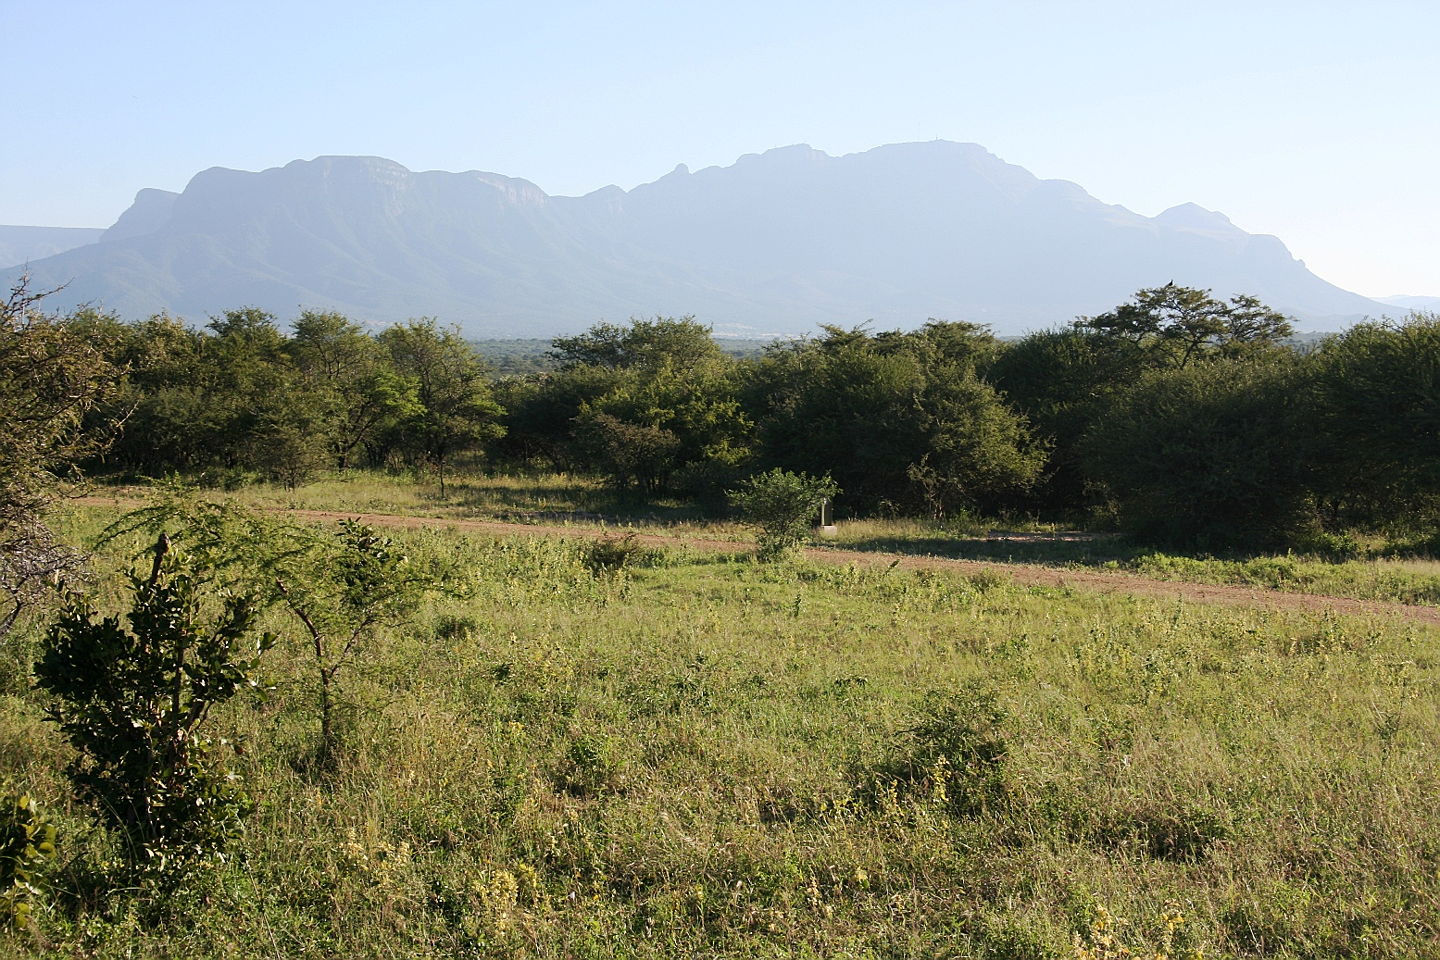  Hoedspruit
- STAND WITH MOUNTAIN VIEW.JPG